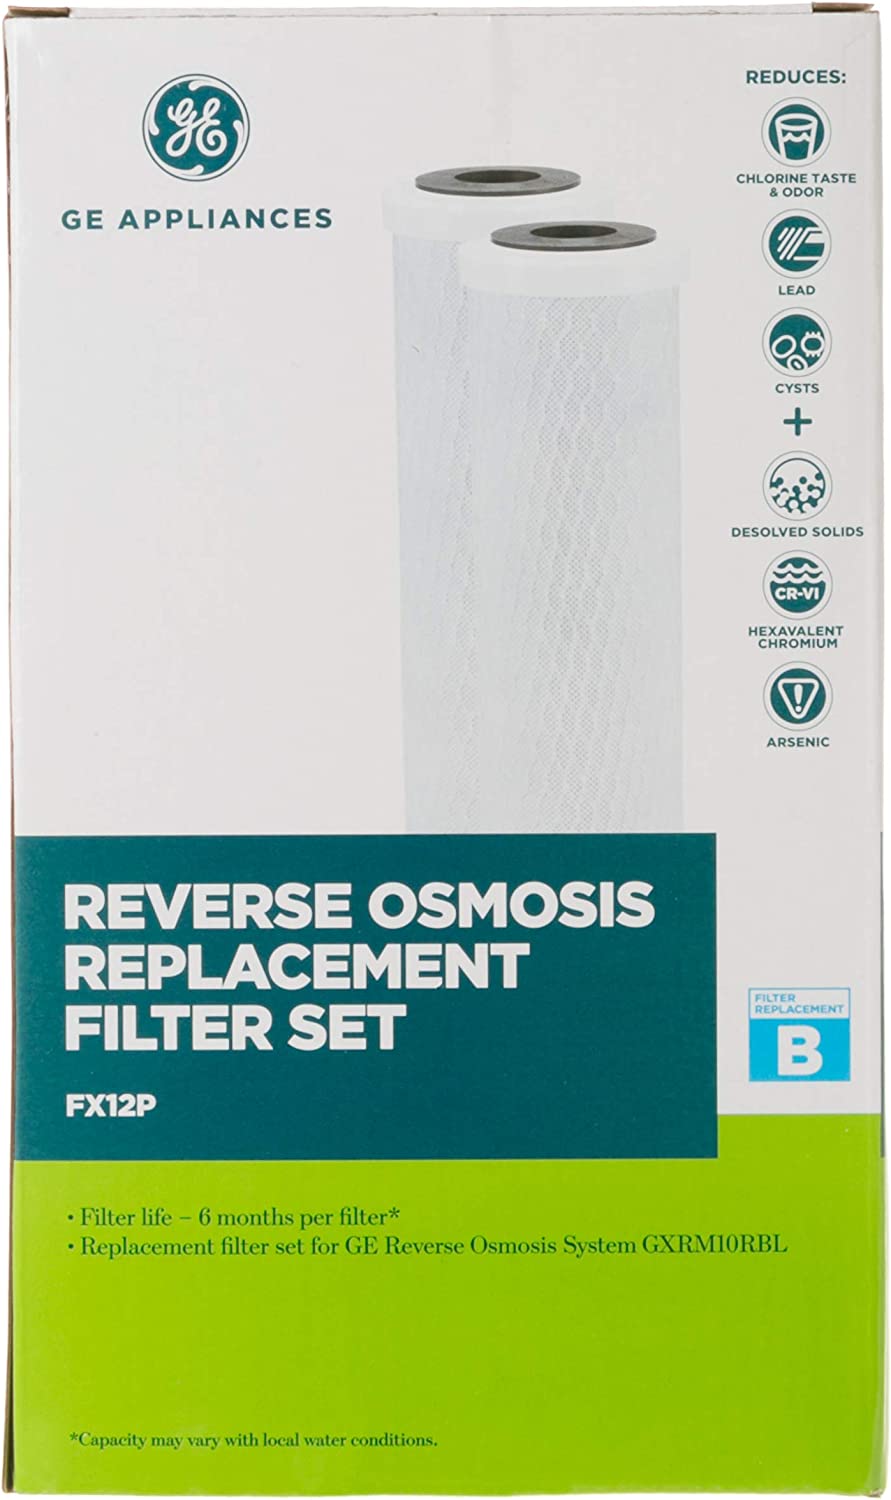 GE FX12P Water Reverse Osmosis Replacement Filter Set, 2 Count (Pack of 1), White